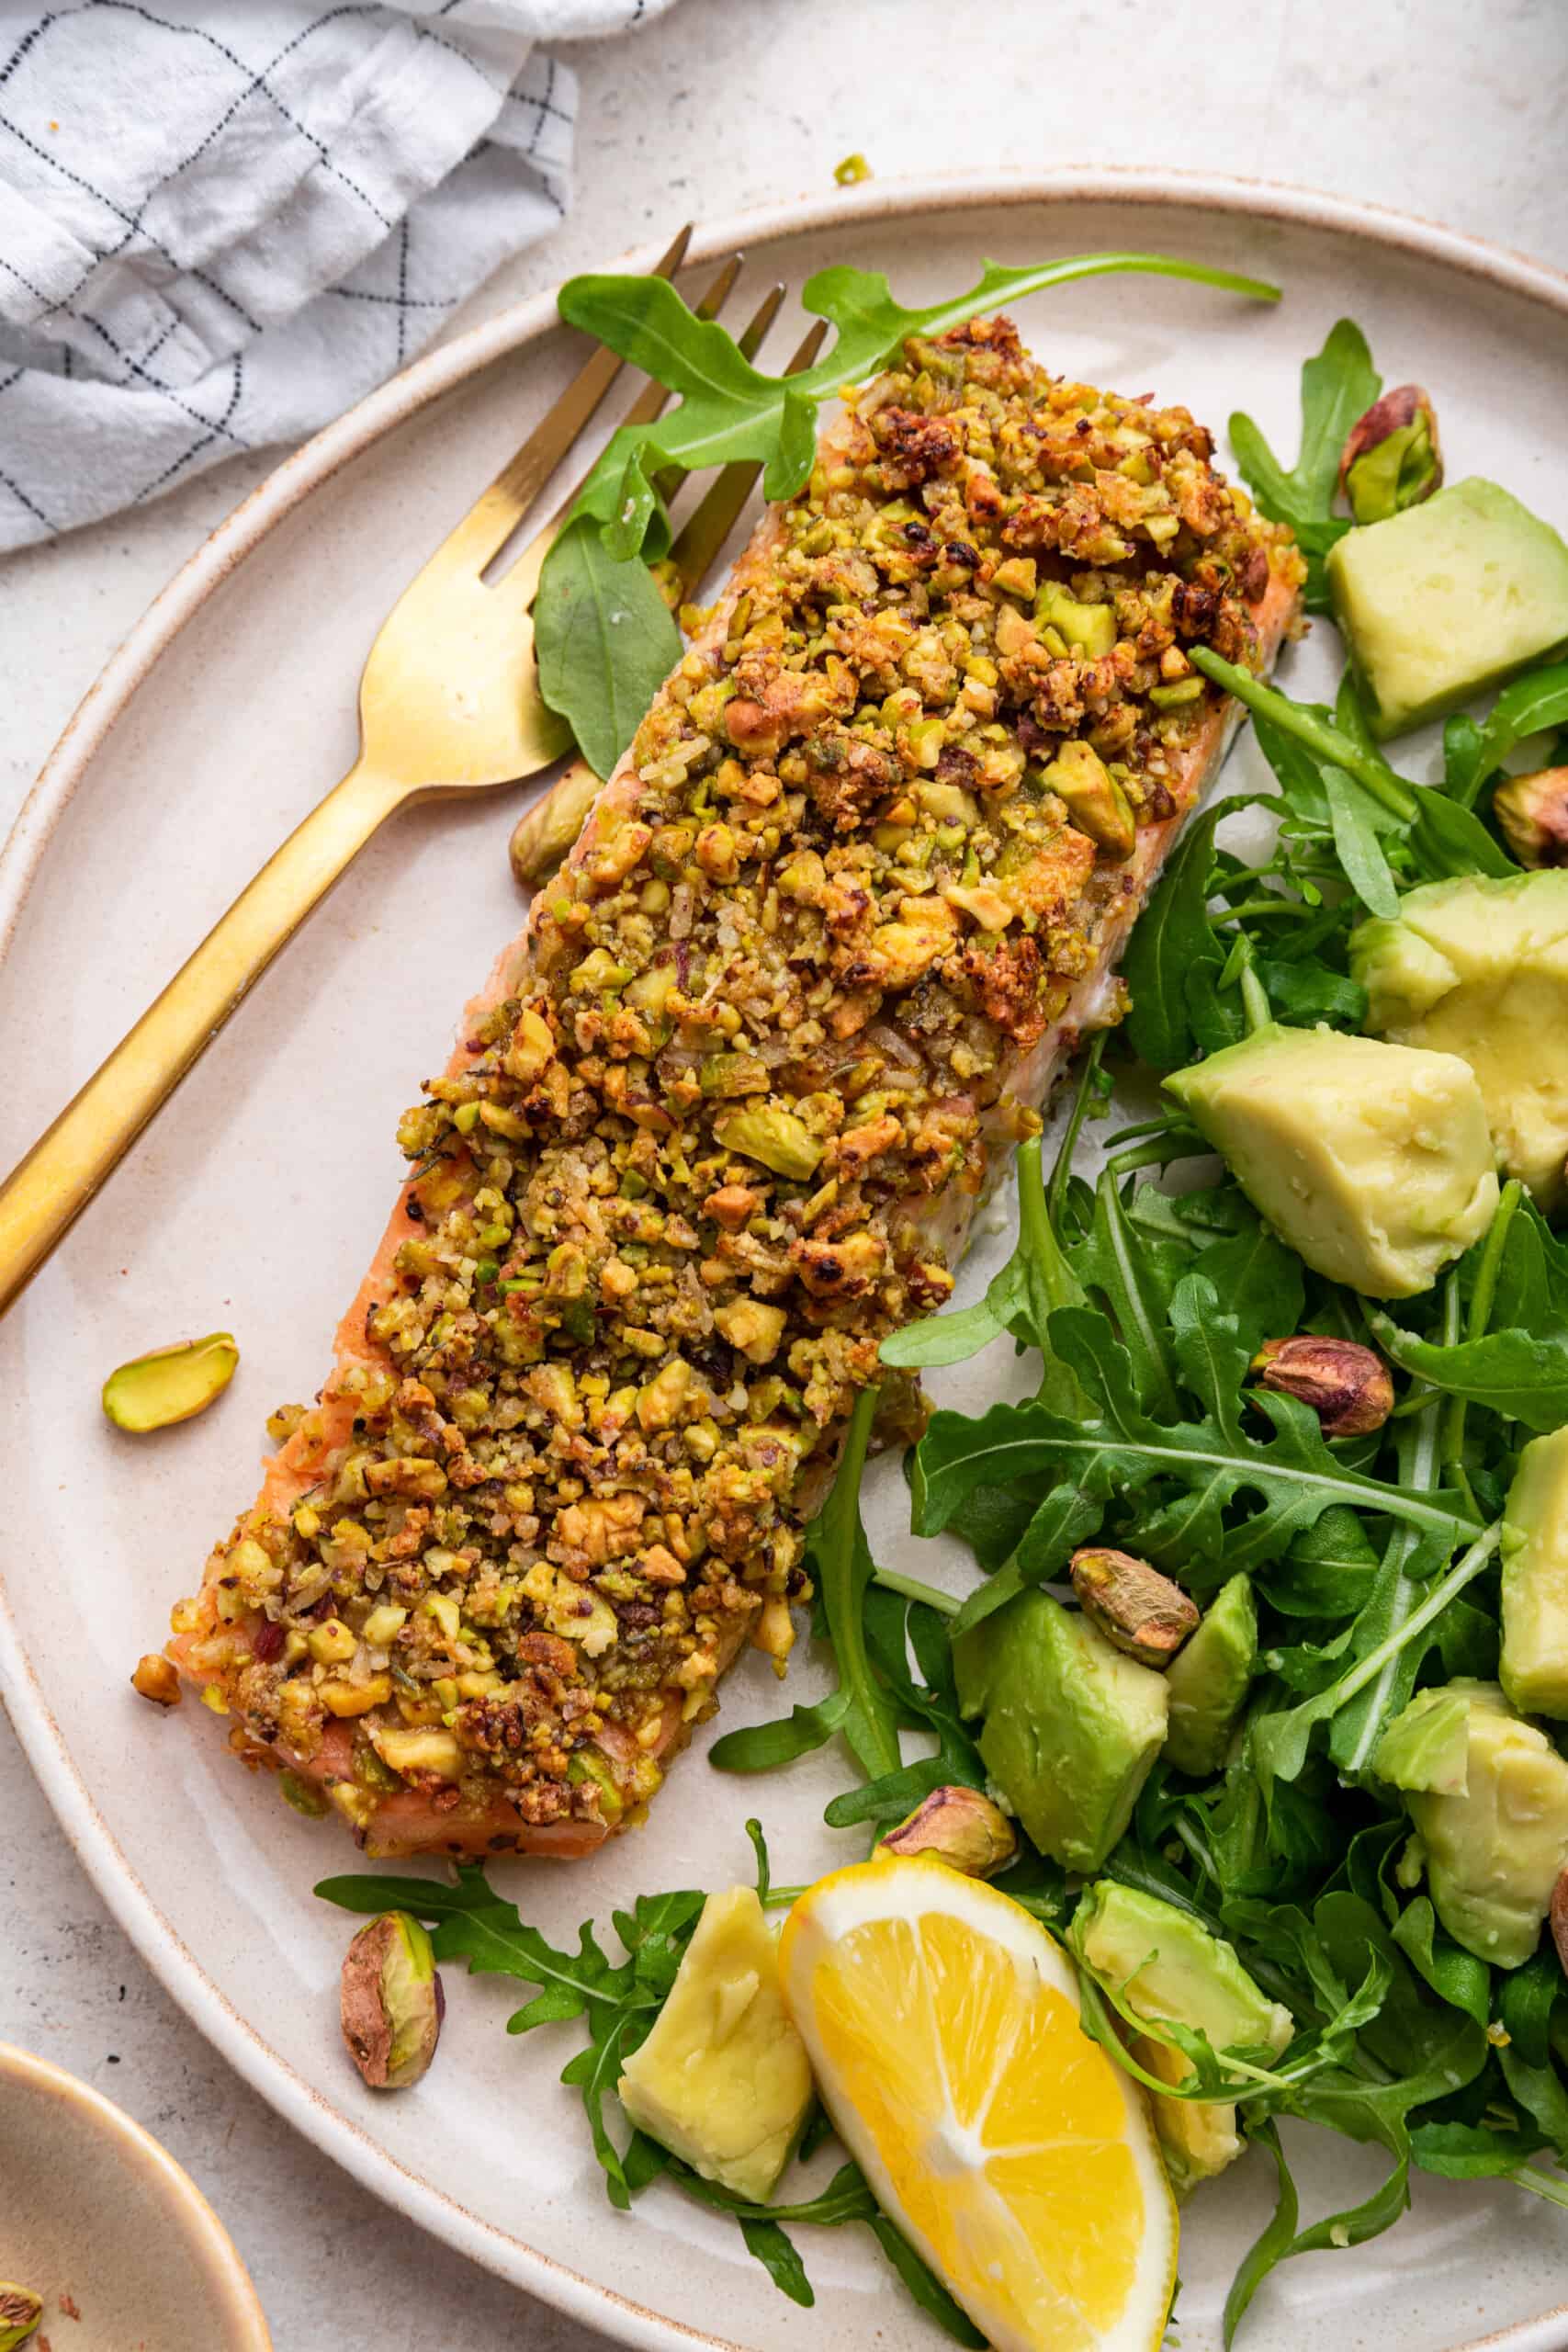 Pistachio crusted salmon on plate with salad and fork